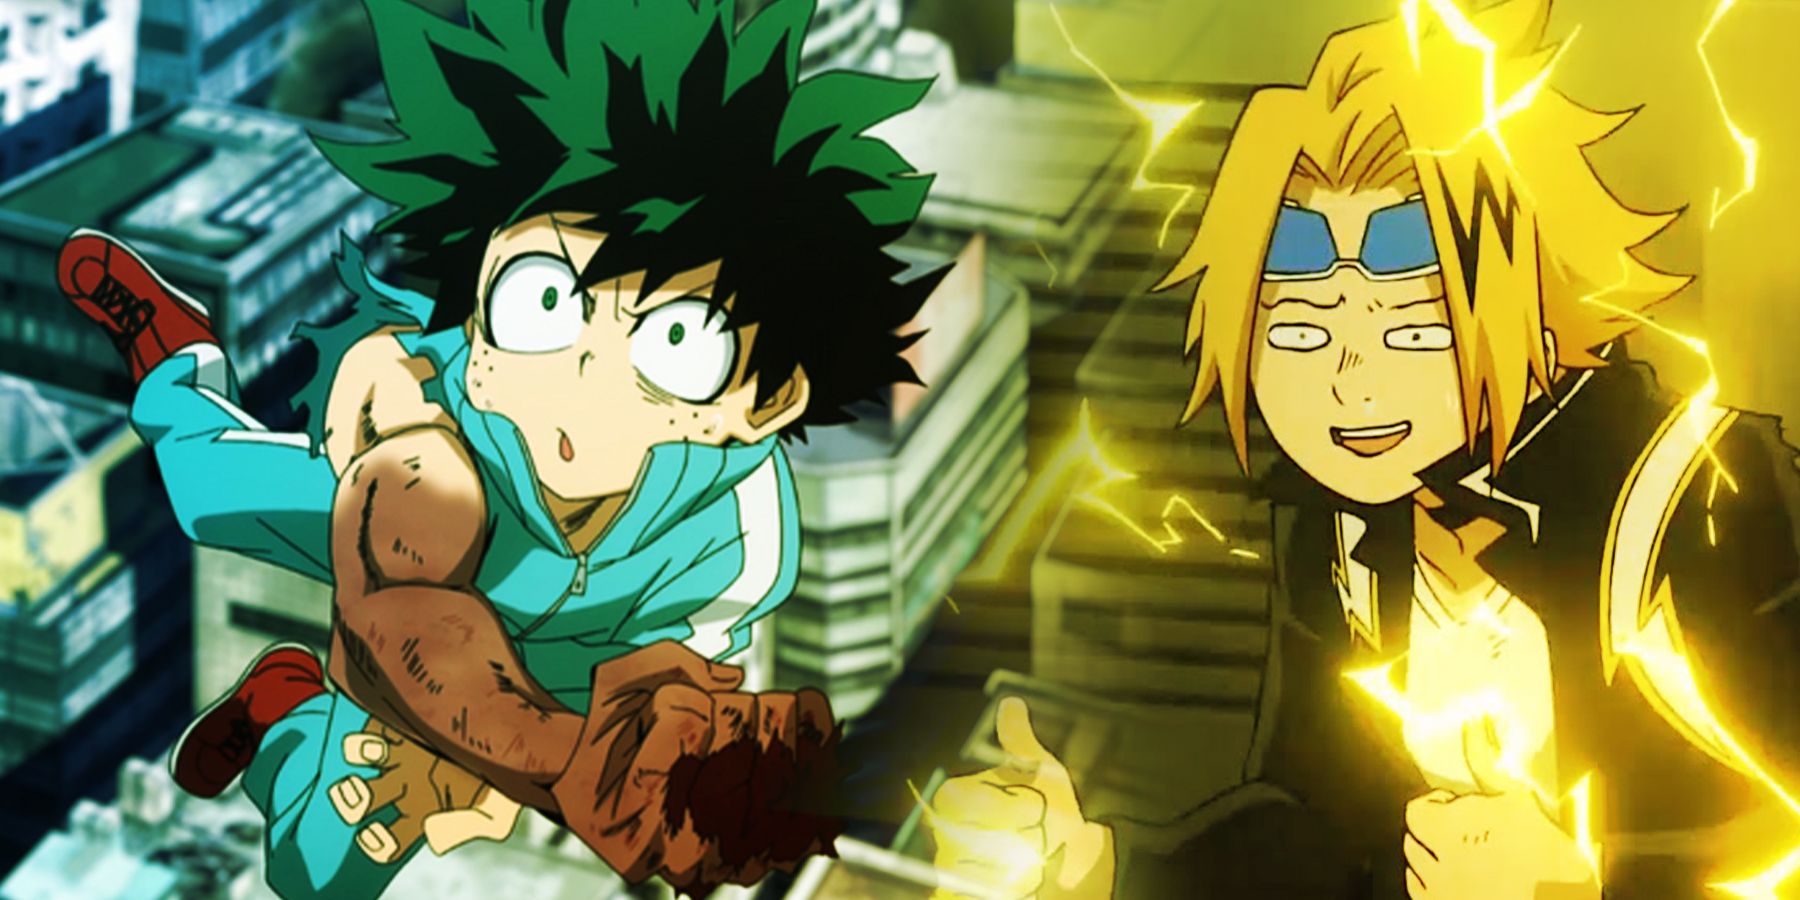 10 Strongest My Hero Academia Quirks And Their Weaknesses